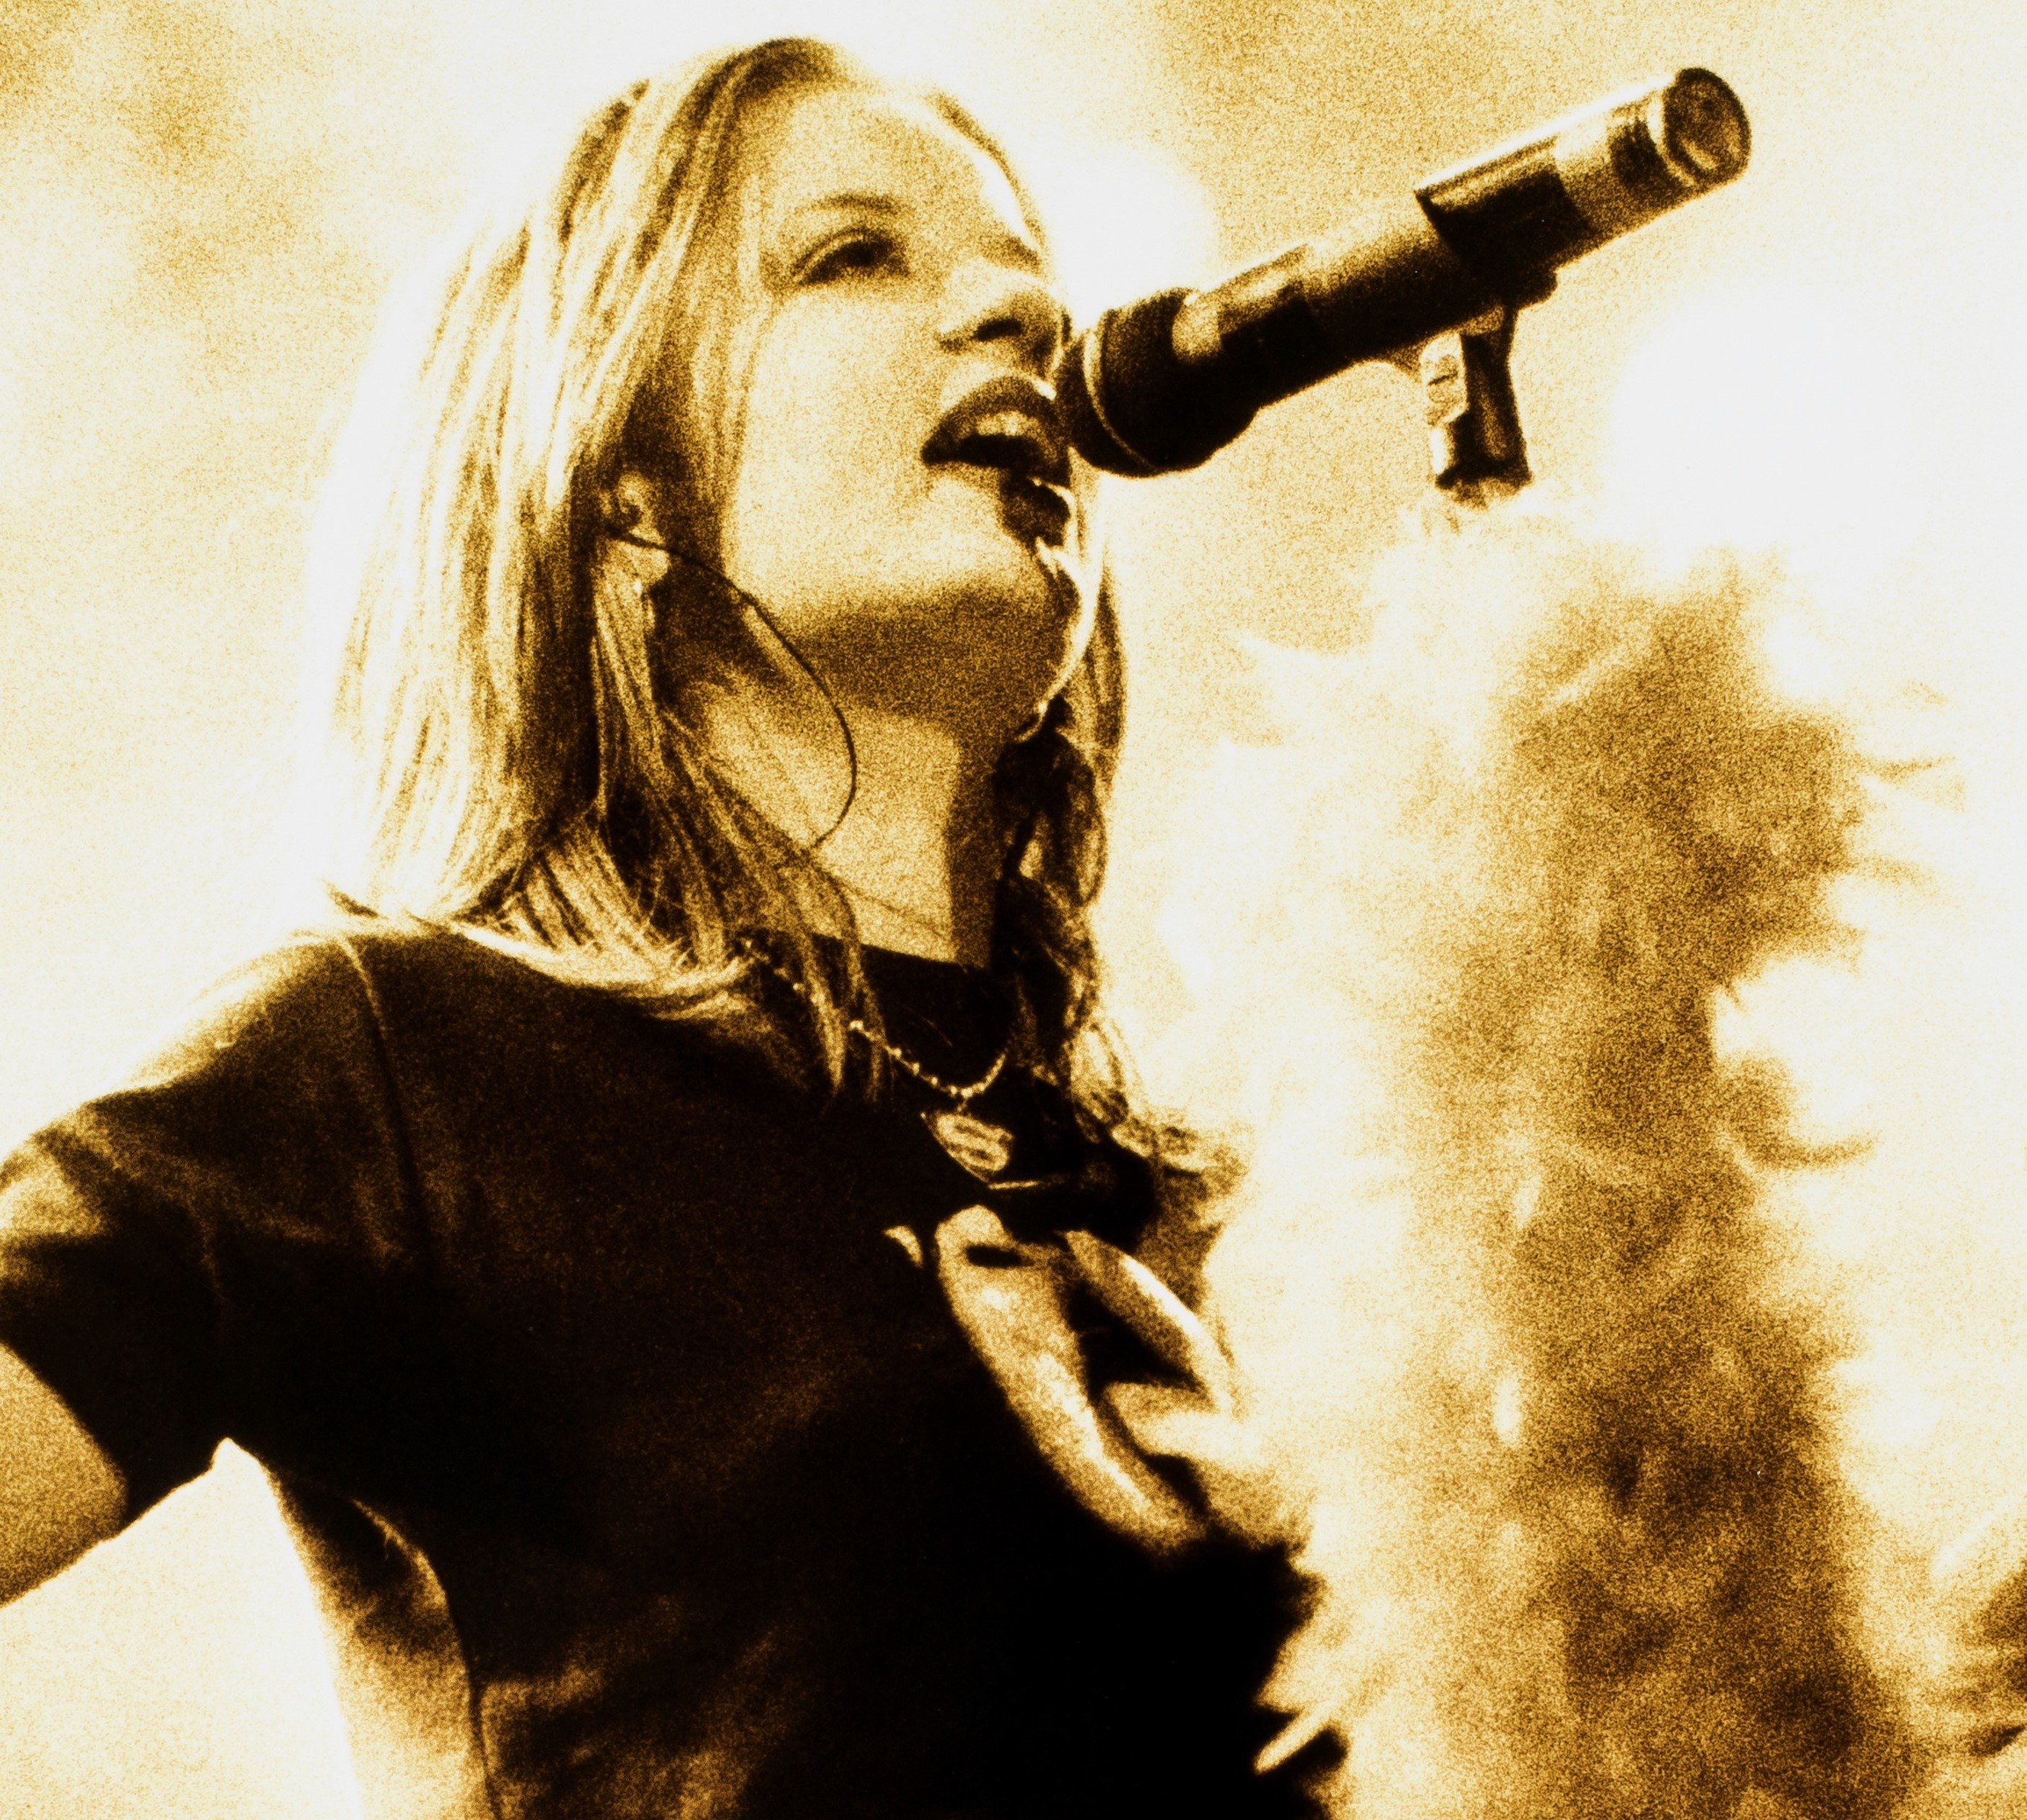 Shirley Manson of Garbage with a microphone